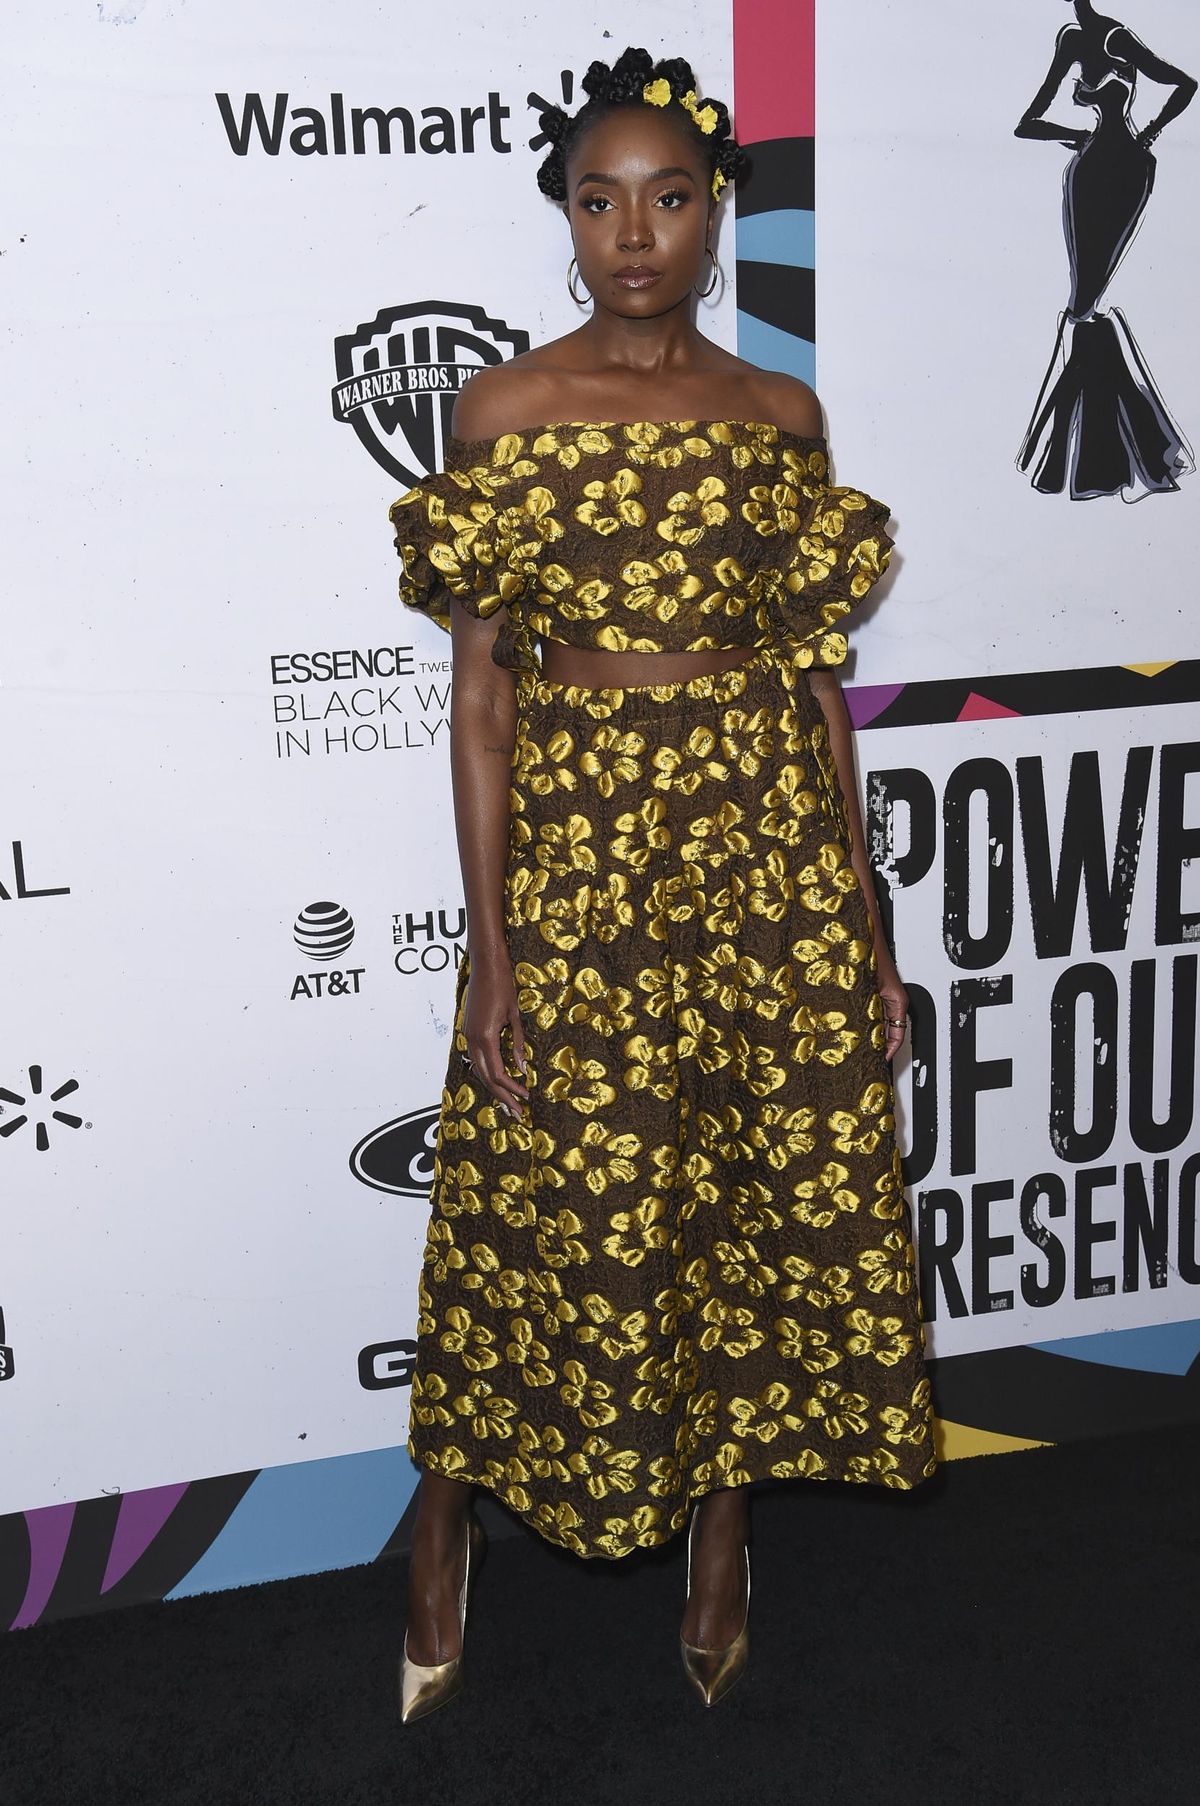 Kiki Layne attends the 12th annual ESSENCE Black Women in Hollywood Awards at the Beverly Wilshire Hotel on Thursday, Feb. 21, 2019, in Beverly Hills, Calif. Layne is one of the lucky ones who hit a home run with her first movie, “If Beale Street Could Talk.” (Richard Shotwell / Invision/Associated Press)